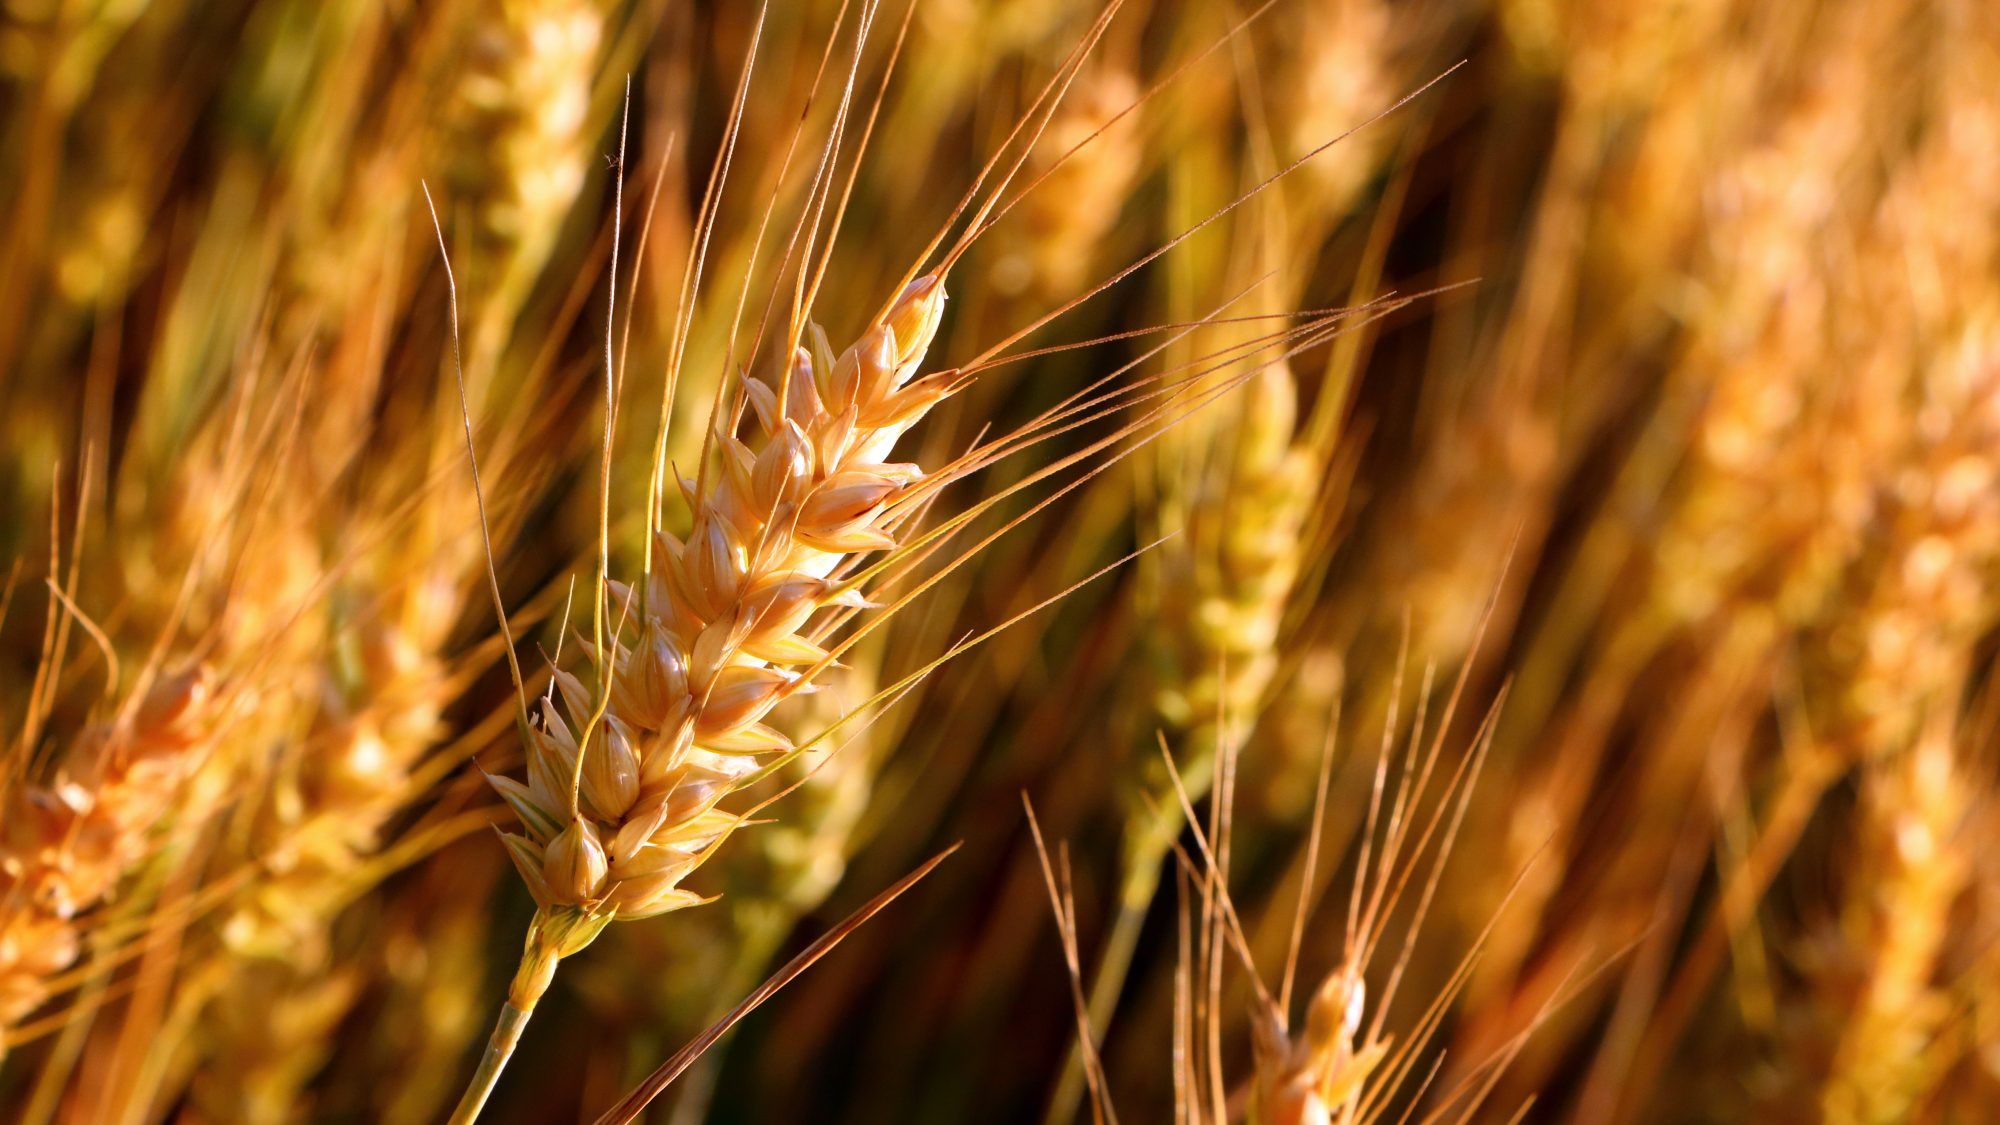 Rising temperature will not affects Wheat crops says food secretary Sanjeev Chopra